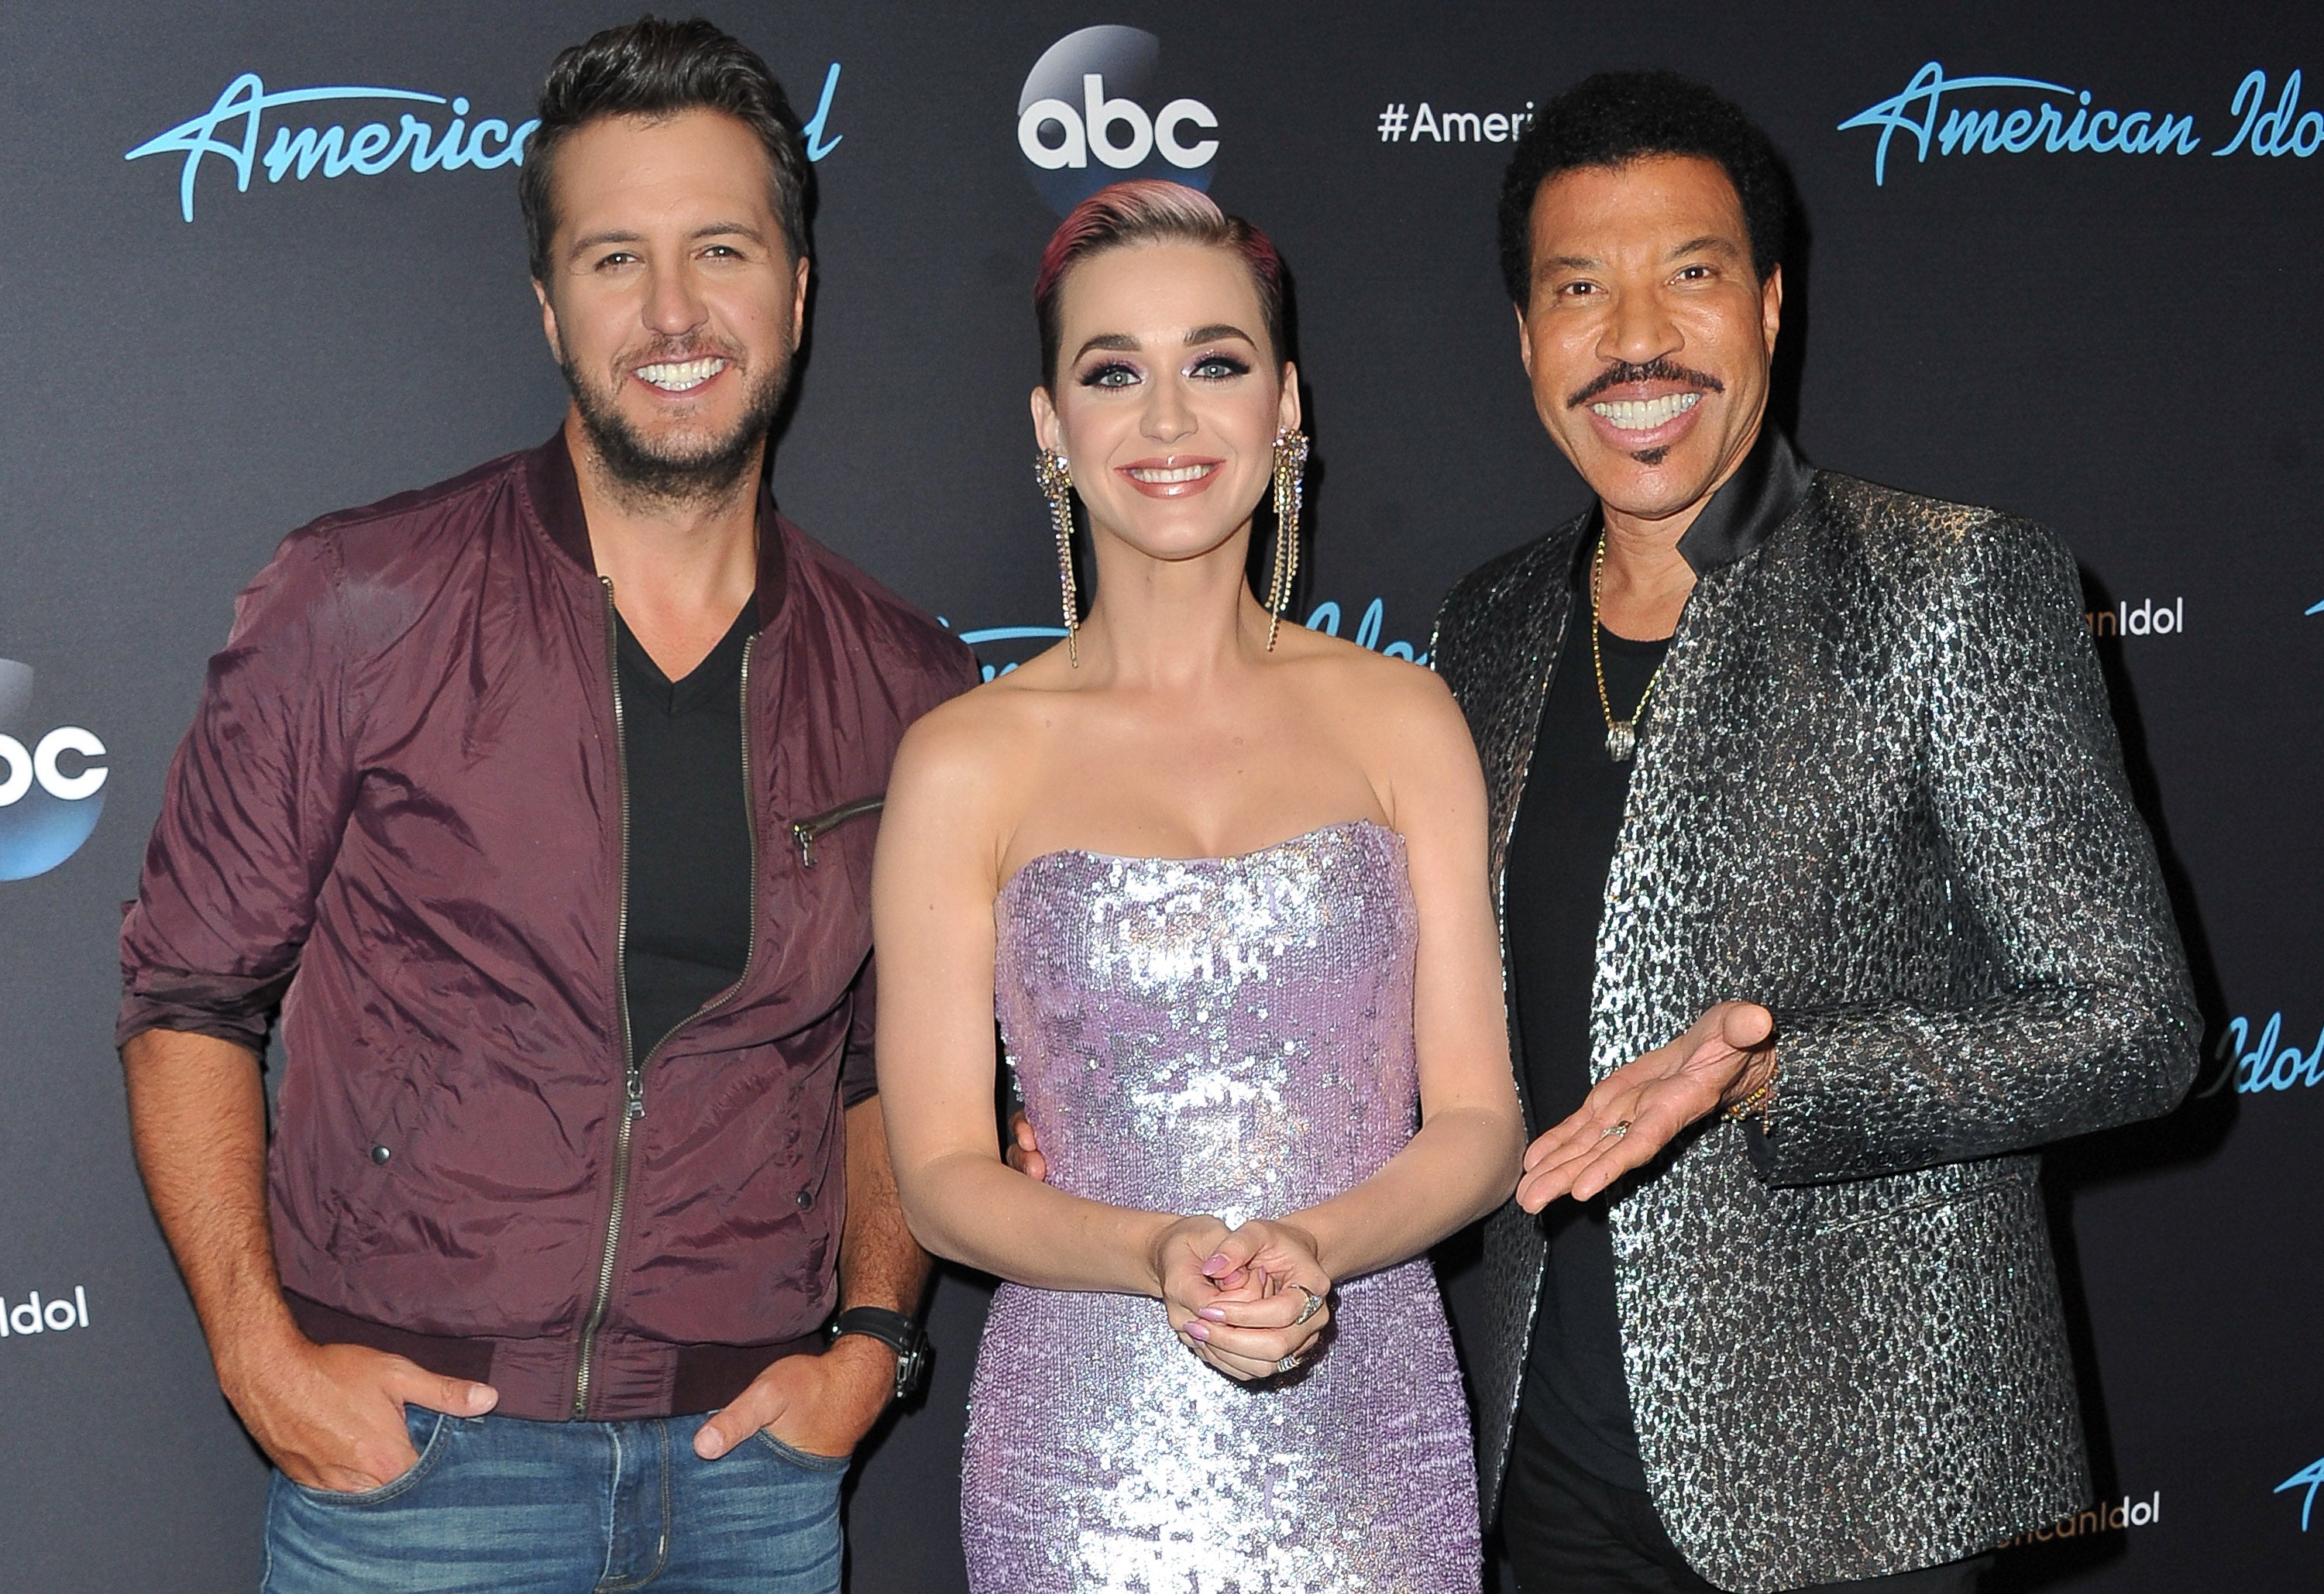 (Left to right) ‘American Idol’ judges Luke Bryan, Katy Perry and Lionel Richie